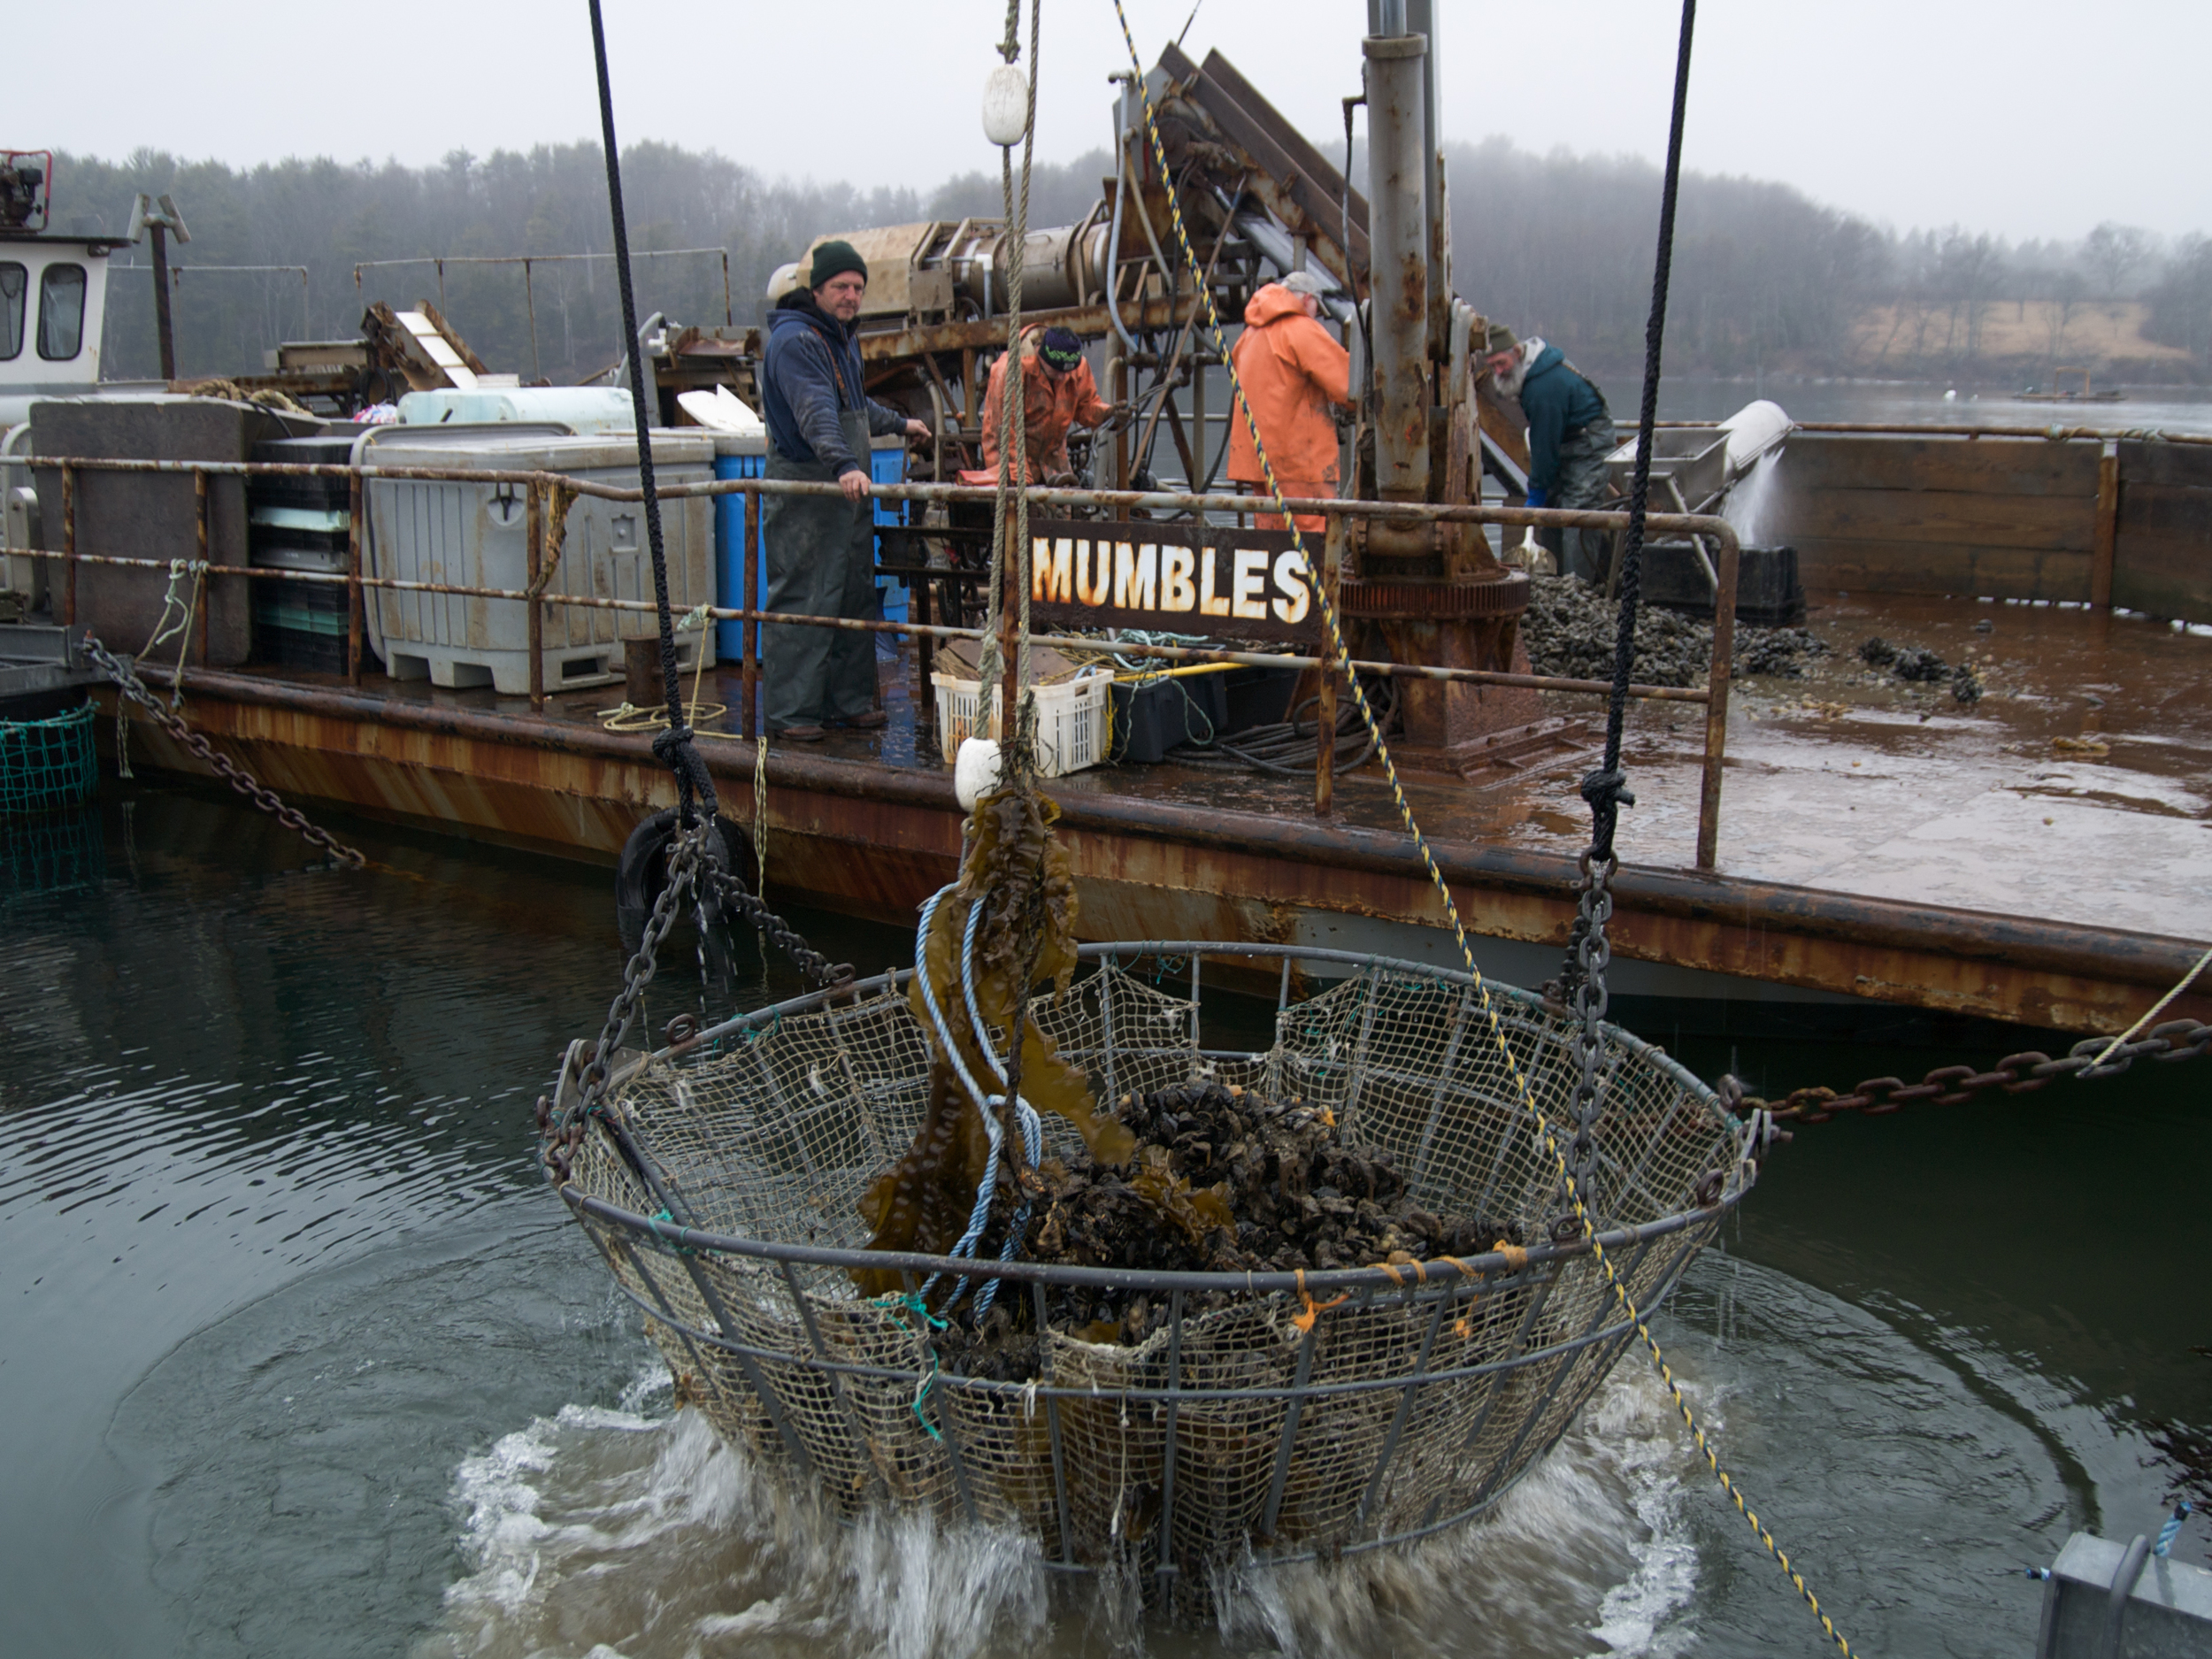  (04/04/09)&nbsp;Carter Newell uses a basket to lift heavy ropes, laden with mussels, onto the deck of his boat Mumbles. Carter once studied in Wales, in a town called Mumbles (an old viking word for breasts) which was distinguished by two large hill